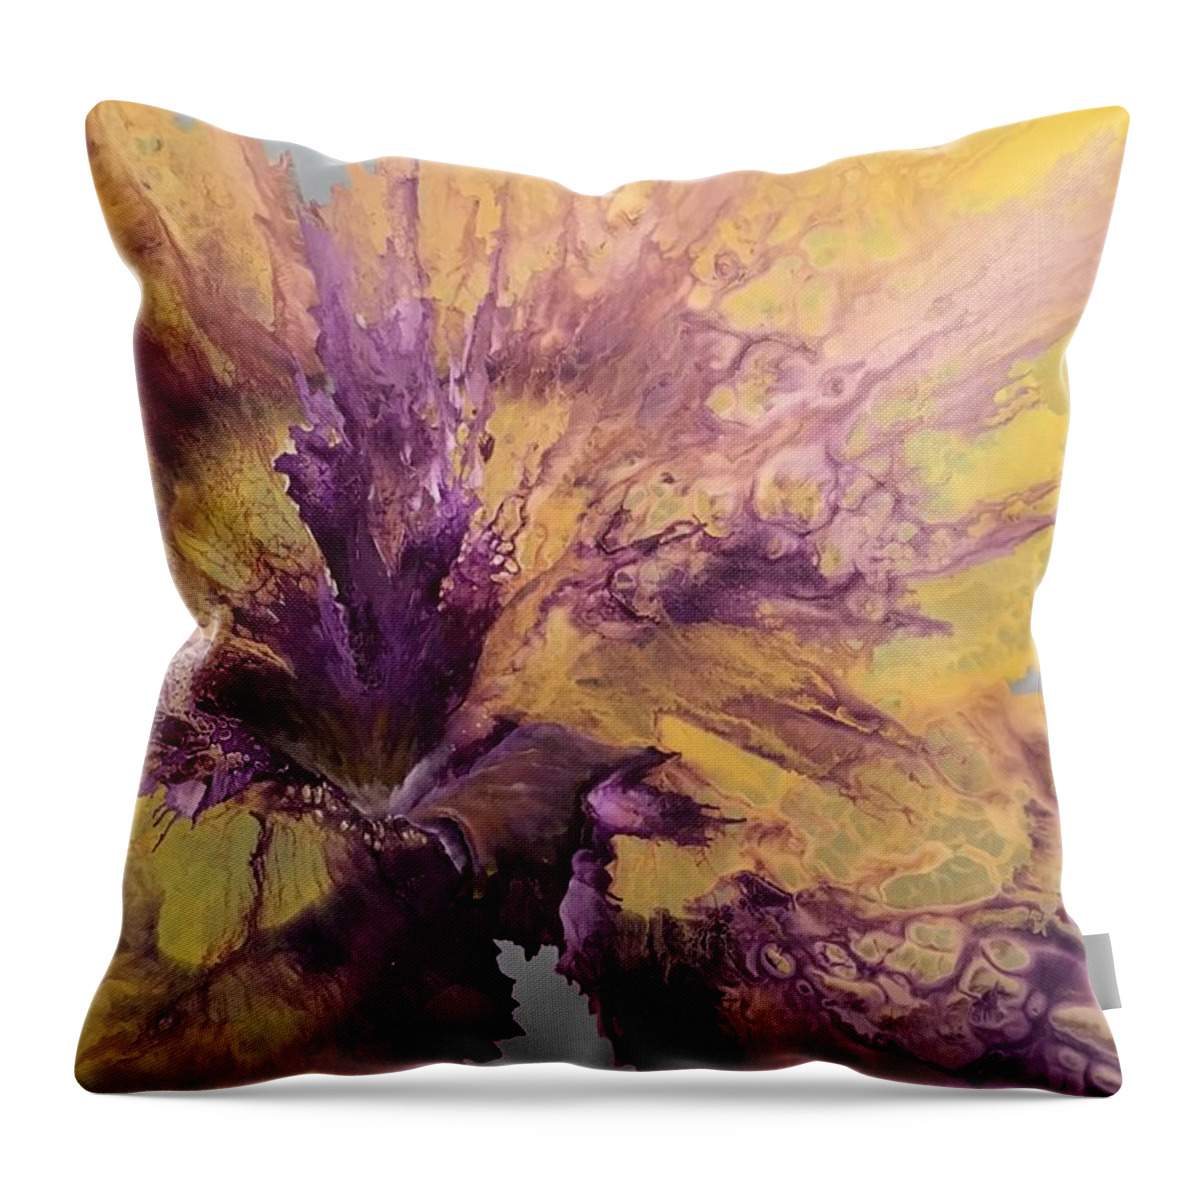 Abstract Throw Pillow featuring the painting Captivating by Soraya Silvestri